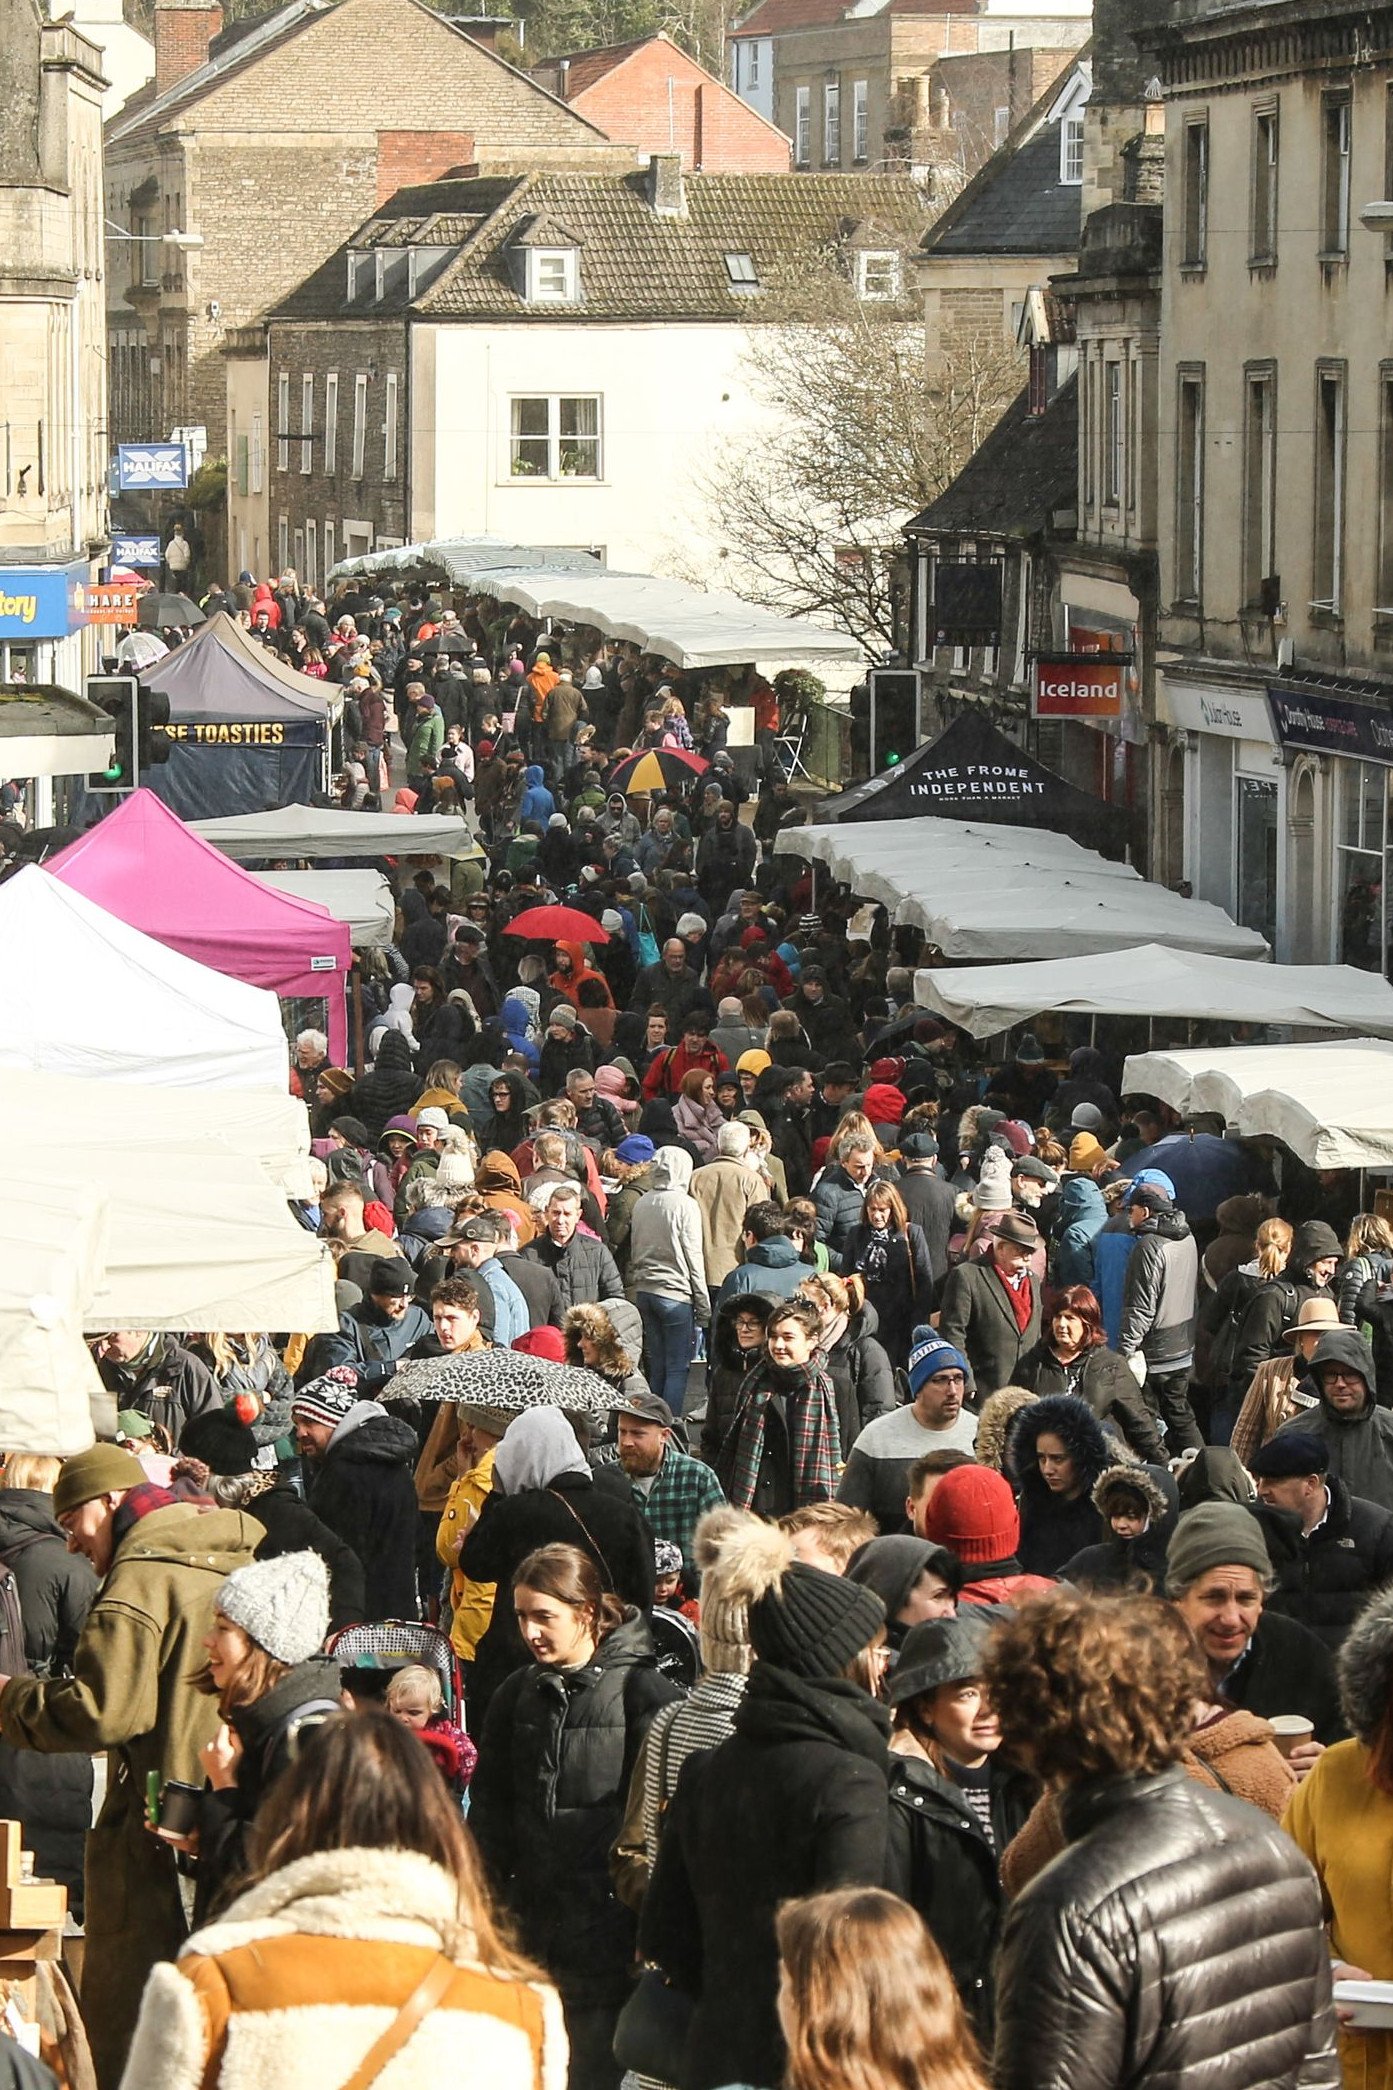 Frome Market